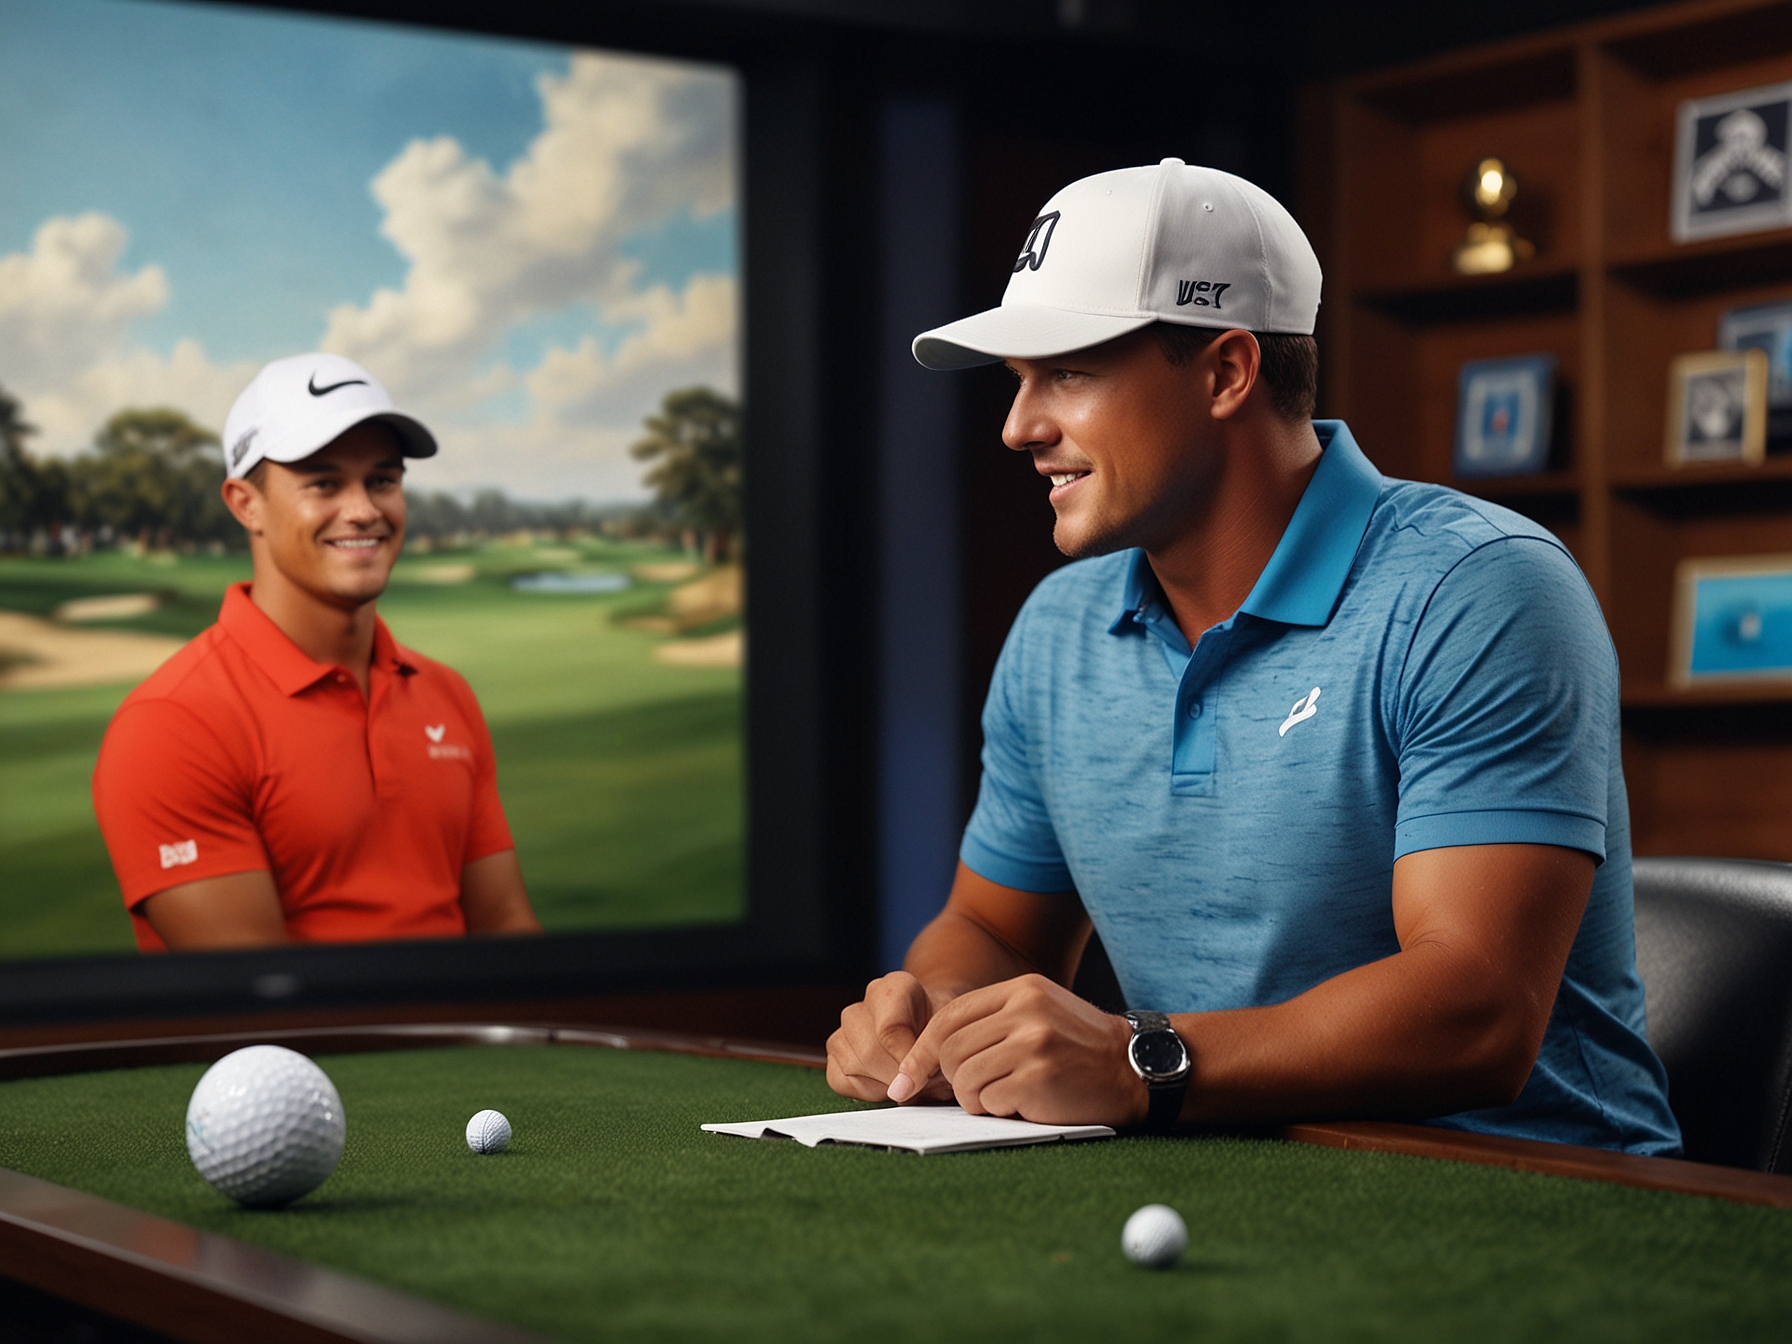 Bryson DeChambeau and Johnson Wagner share a lively discussion on the Golf Channel set, blending technical golf insights with engaging commentary, making complex concepts accessible to all viewers.